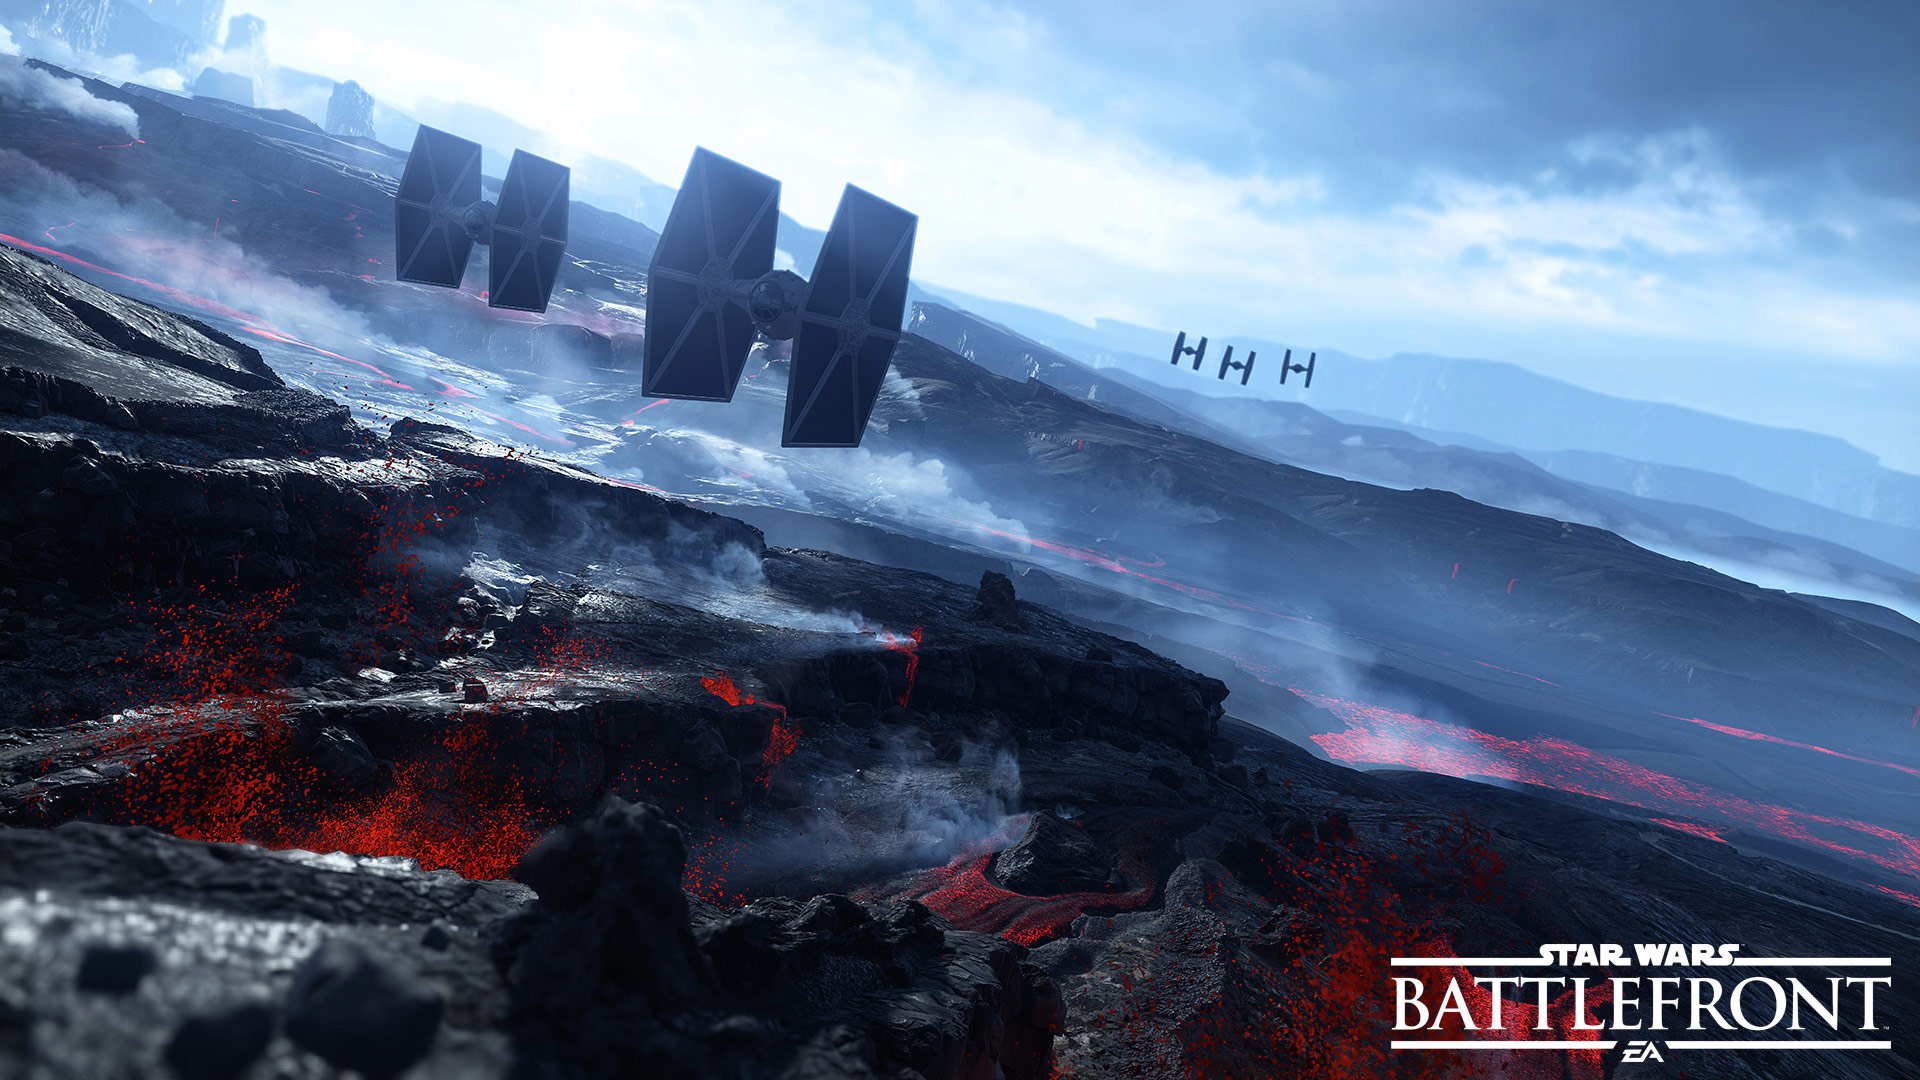 Gamescom 2015 Fighter Squadron gameplay from Star Wars Battlefront